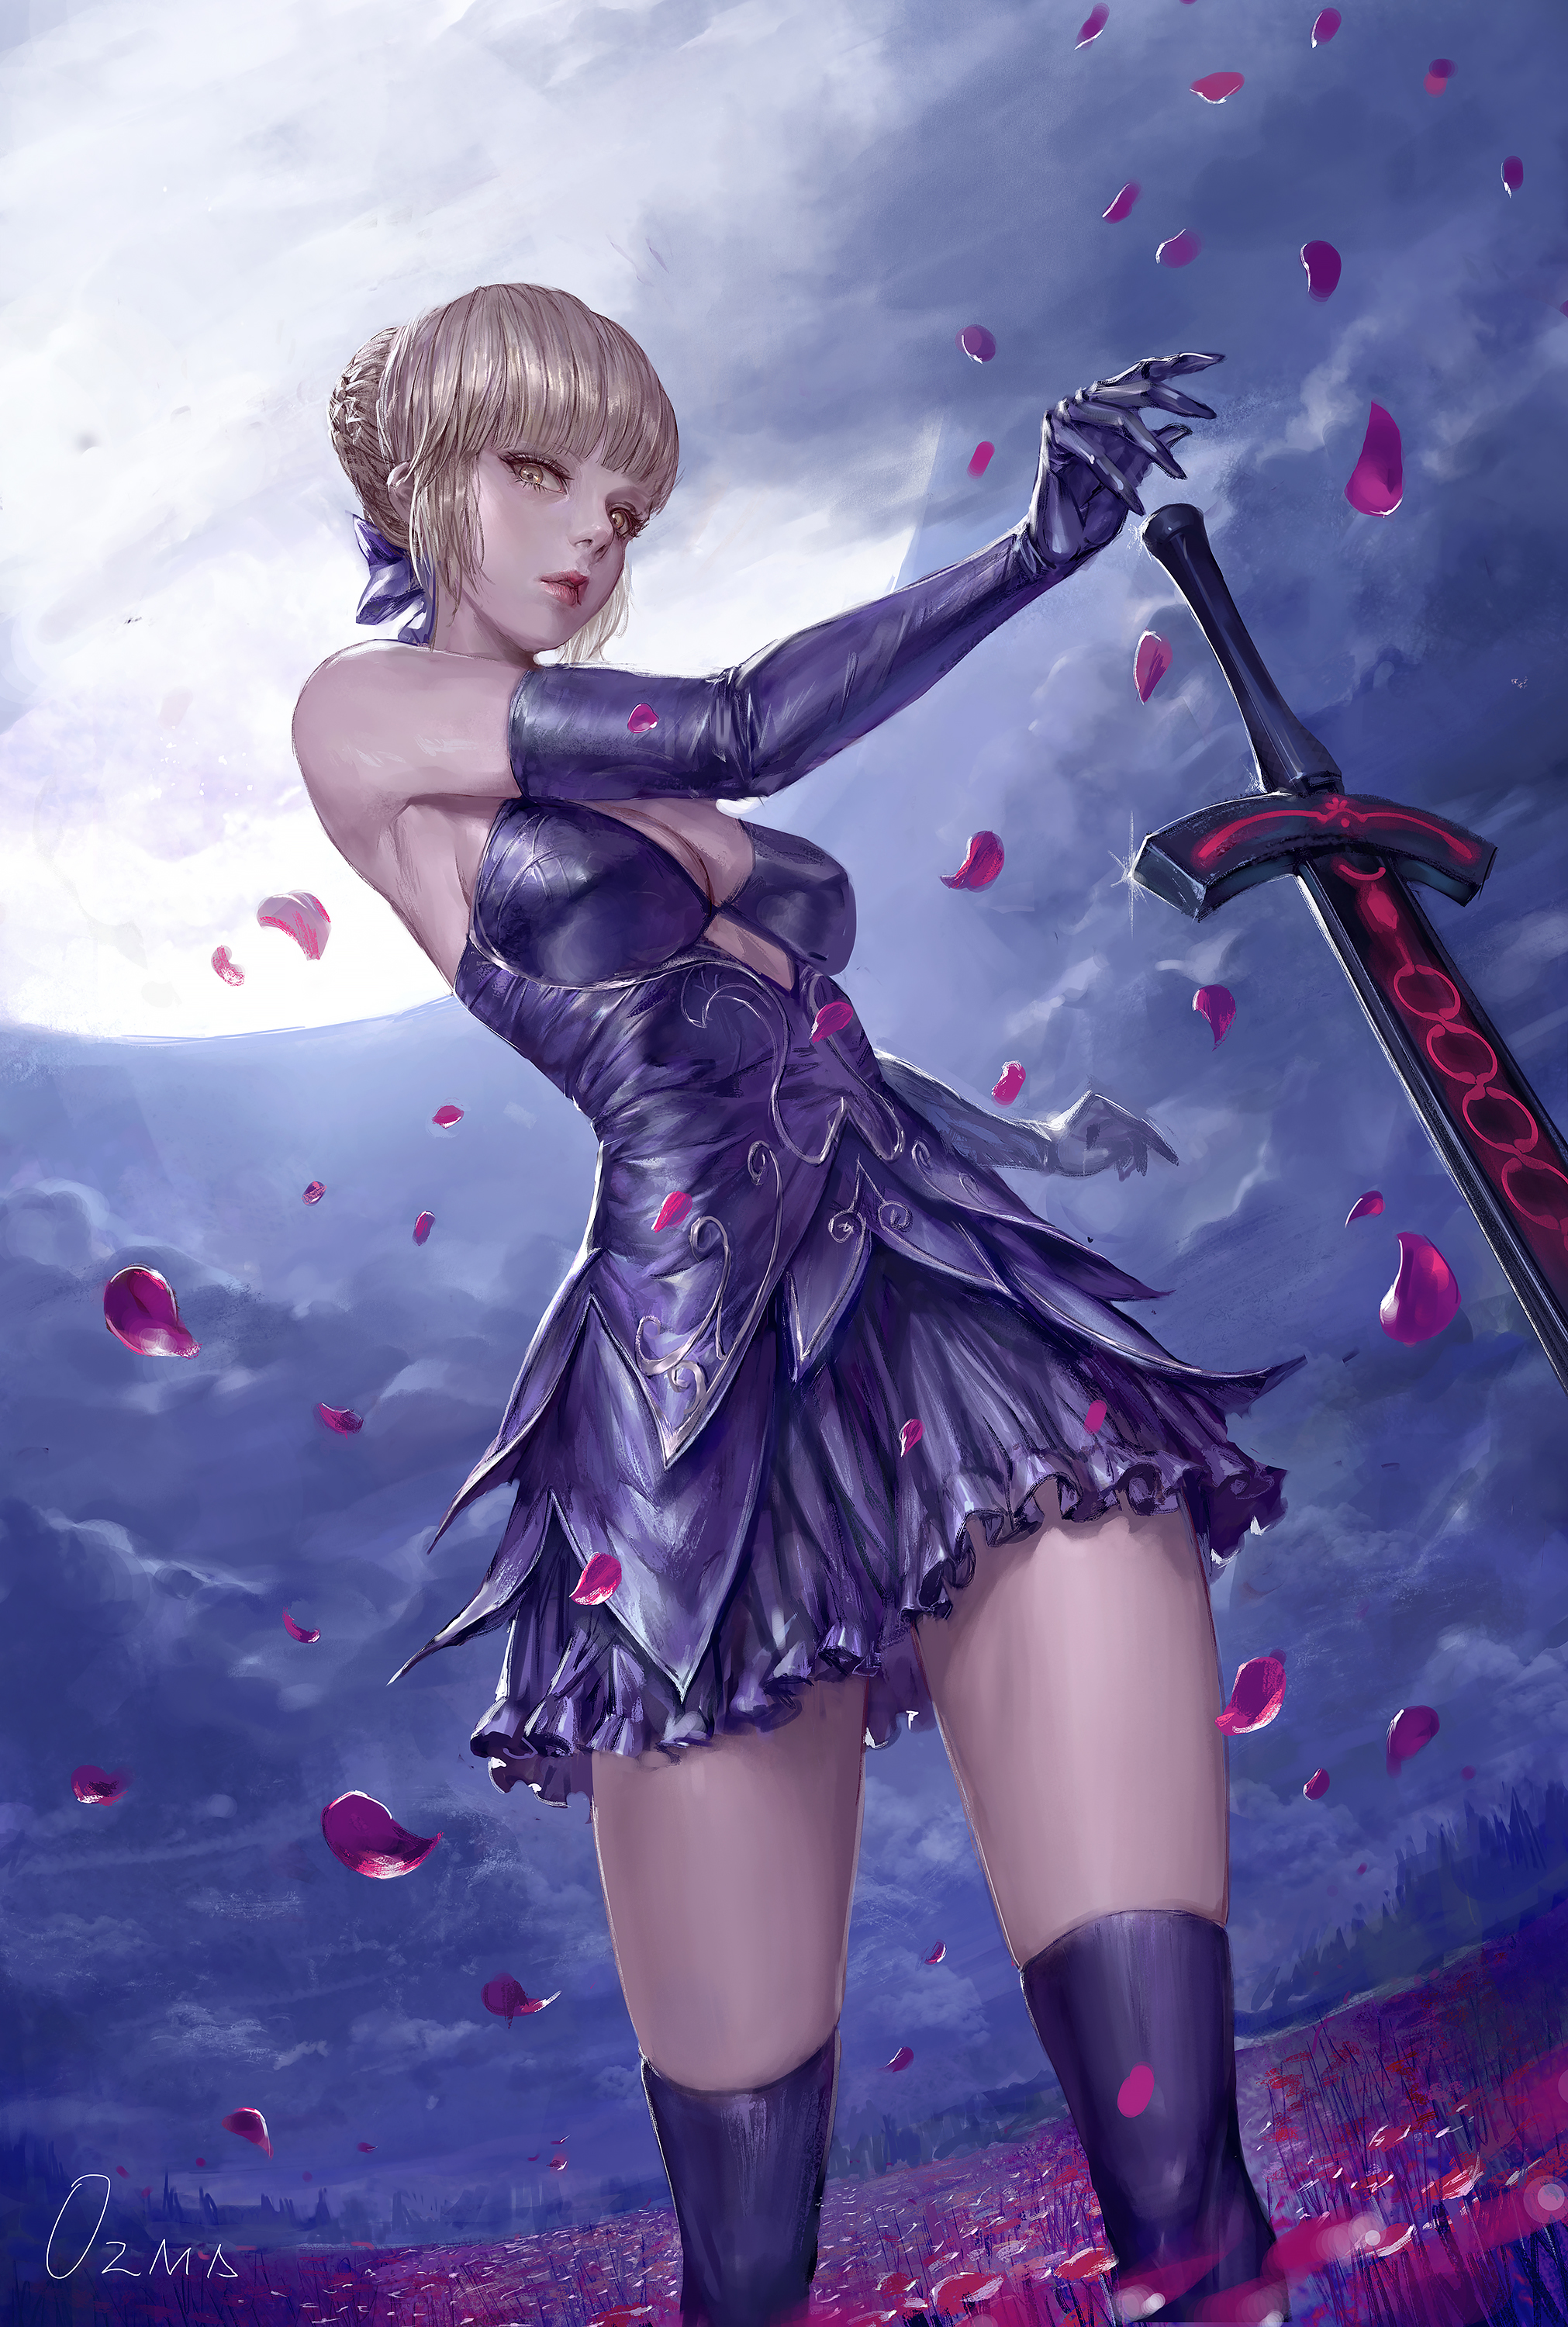 Fate Series Fate Stay Night Fate Stay Night Heavens Feel Anime Girls Blond Hair Flower Petals Black  2022x3000